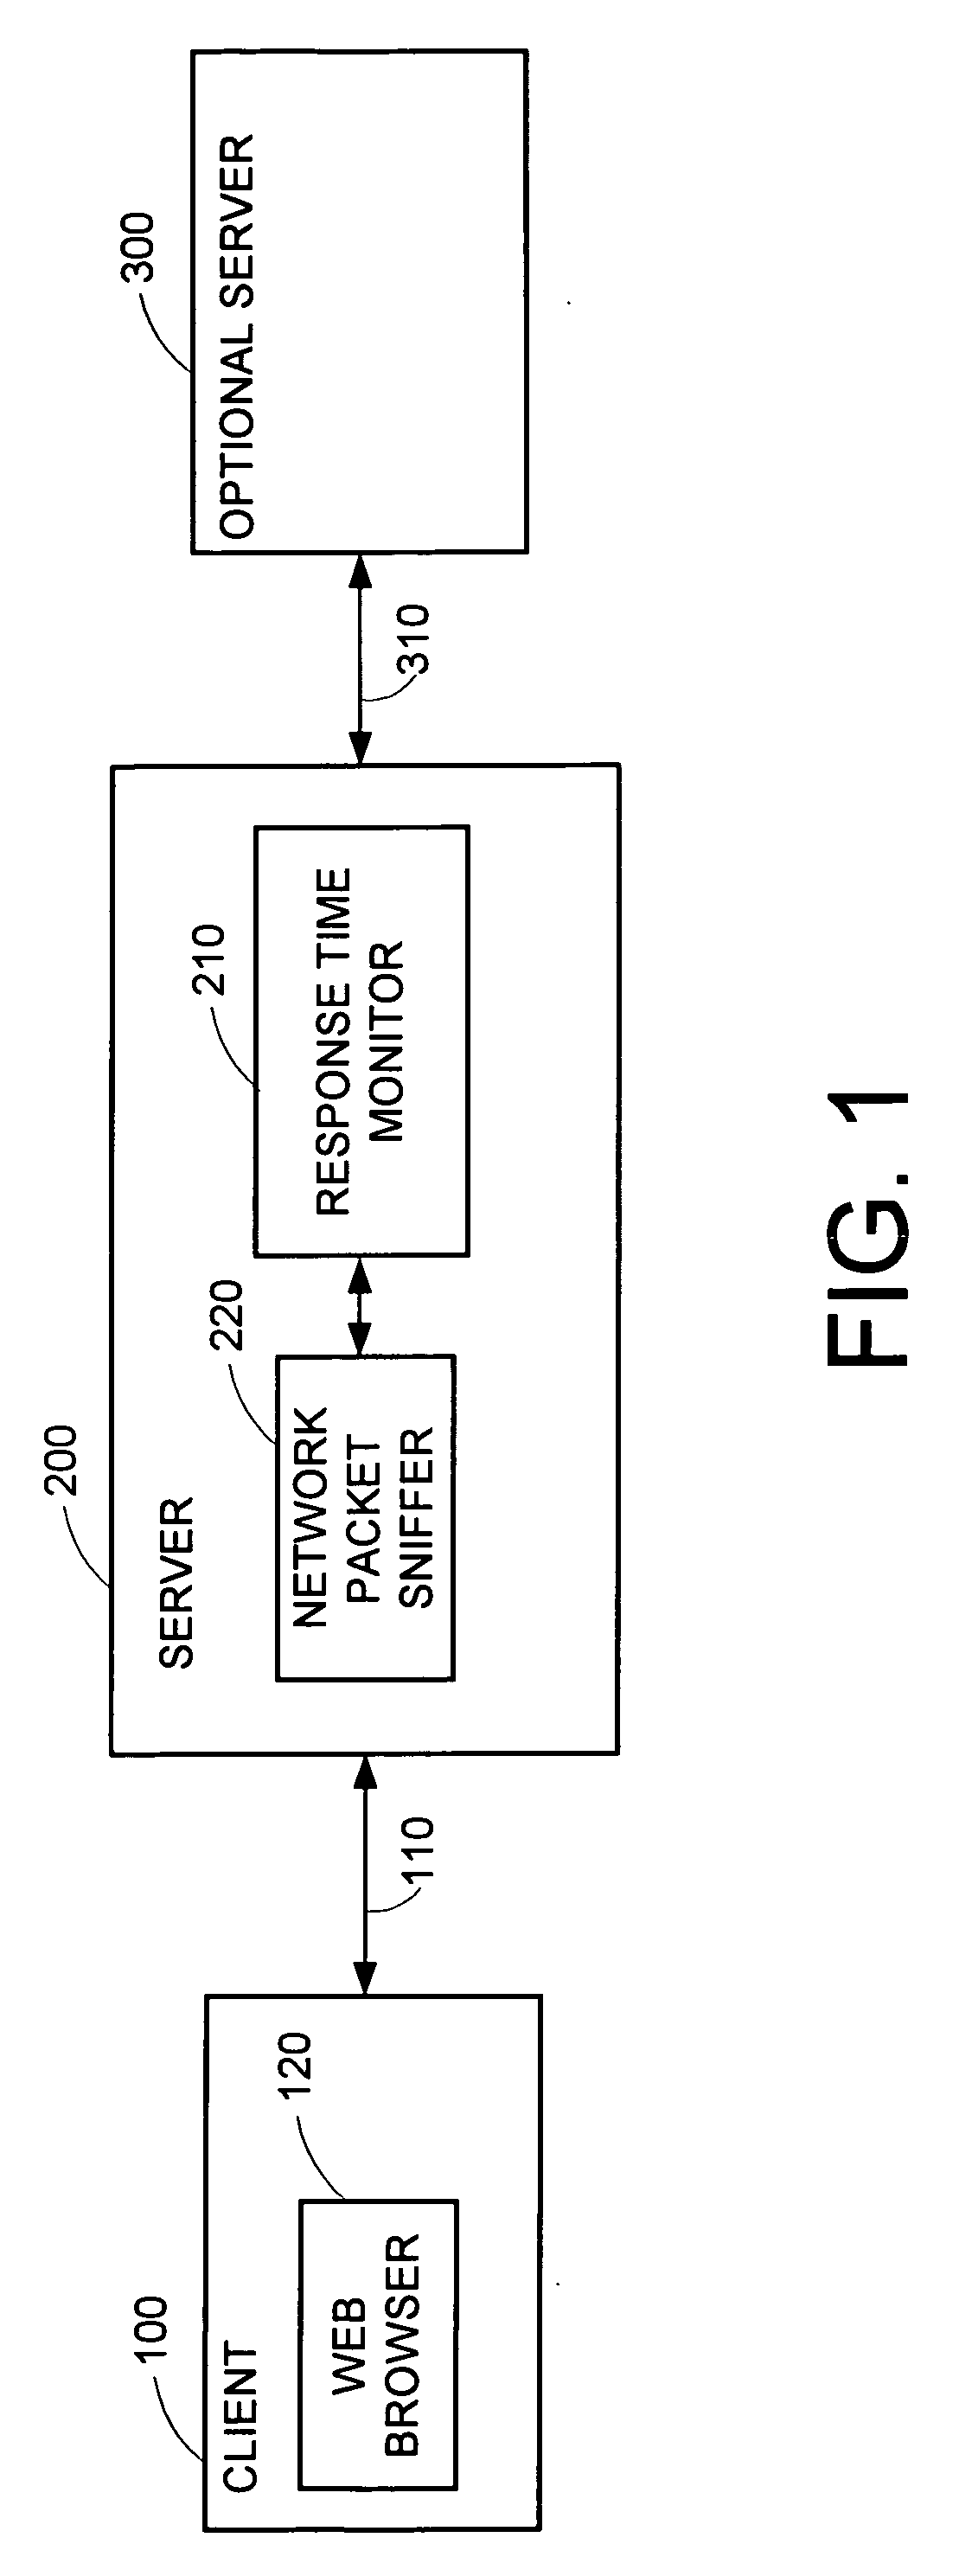 System and method utilizing a single agent on a non-origin node for measuring the roundtrip response time of web pages with embedded HTML frames over a public or private network